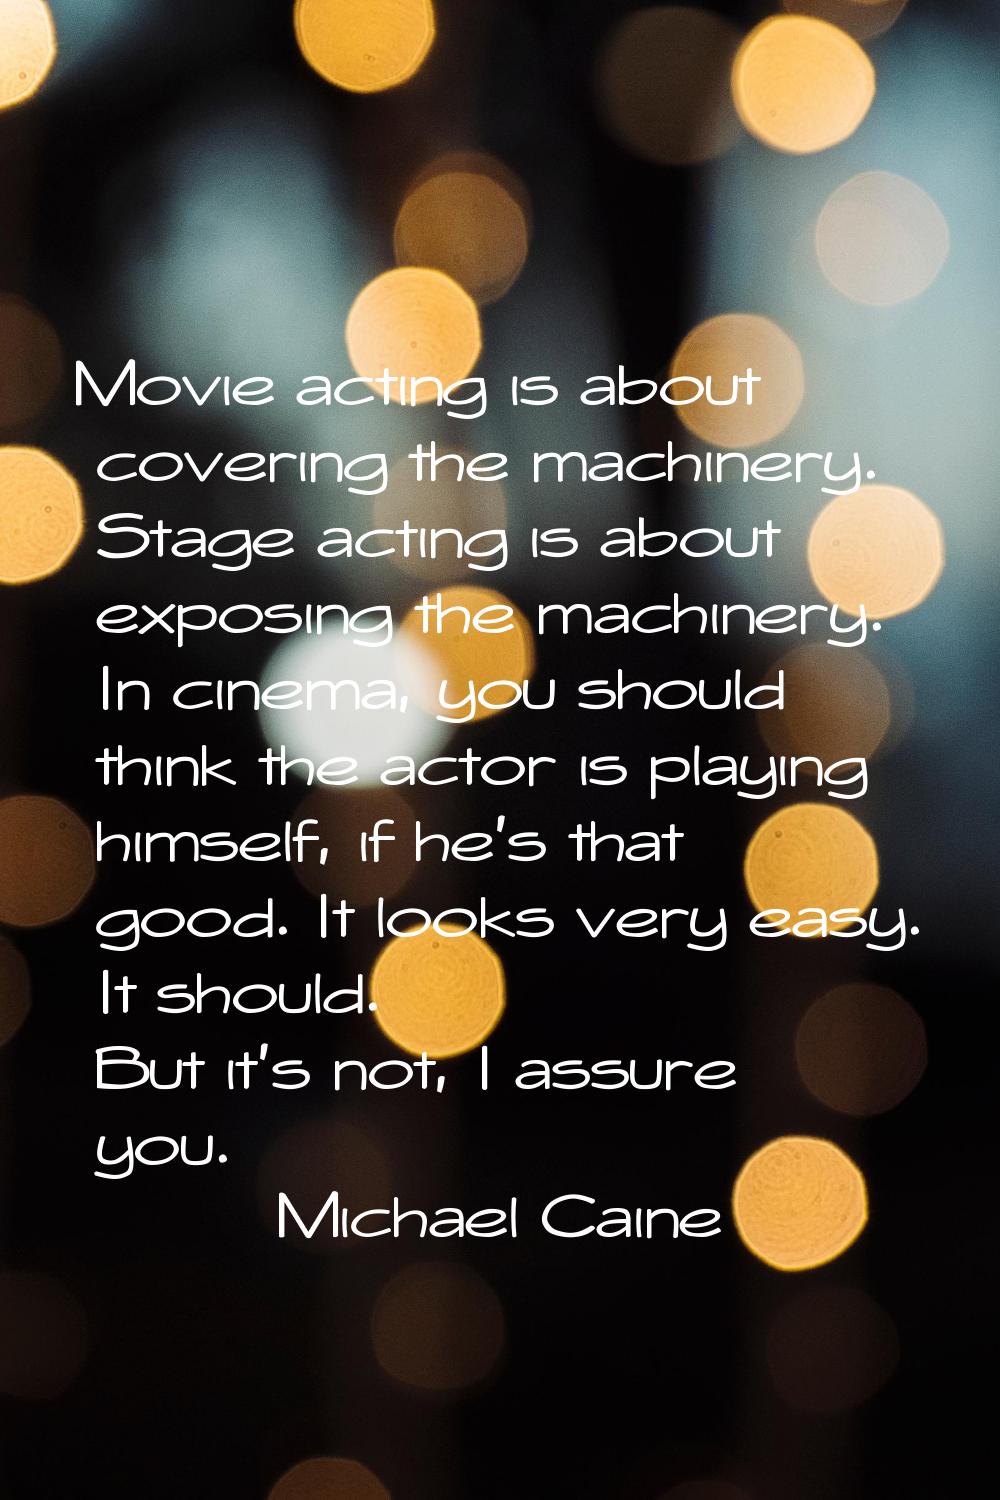 Movie acting is about covering the machinery. Stage acting is about exposing the machinery. In cine